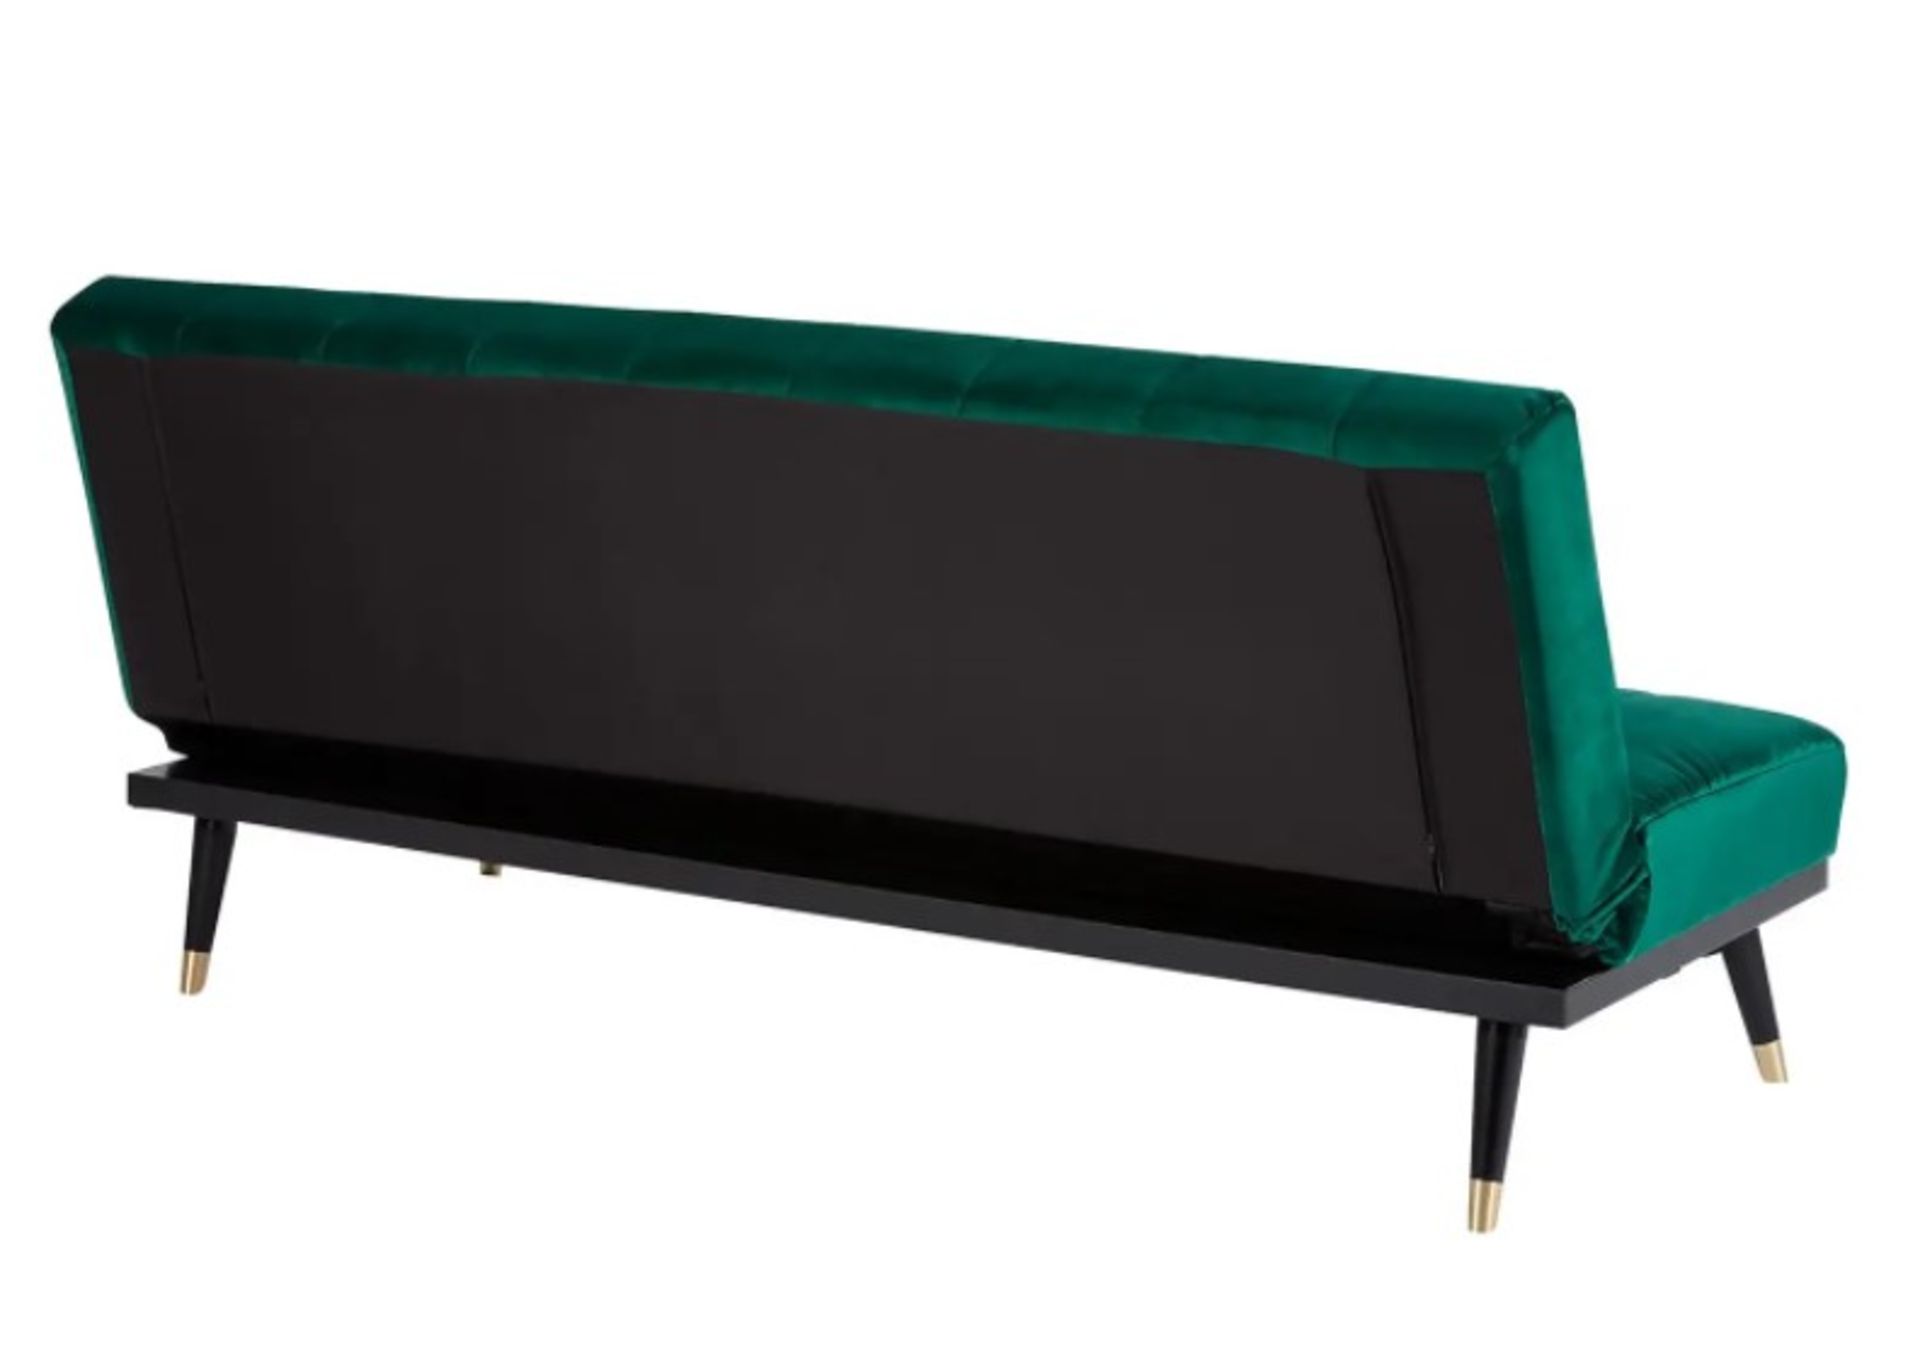 1x Sindy Sofa Bed Luxe Emerald Green (With Legs) RRP £250. Sofa : (H)82 x (W)181 x (D)83cm. Sofa - Image 6 of 7